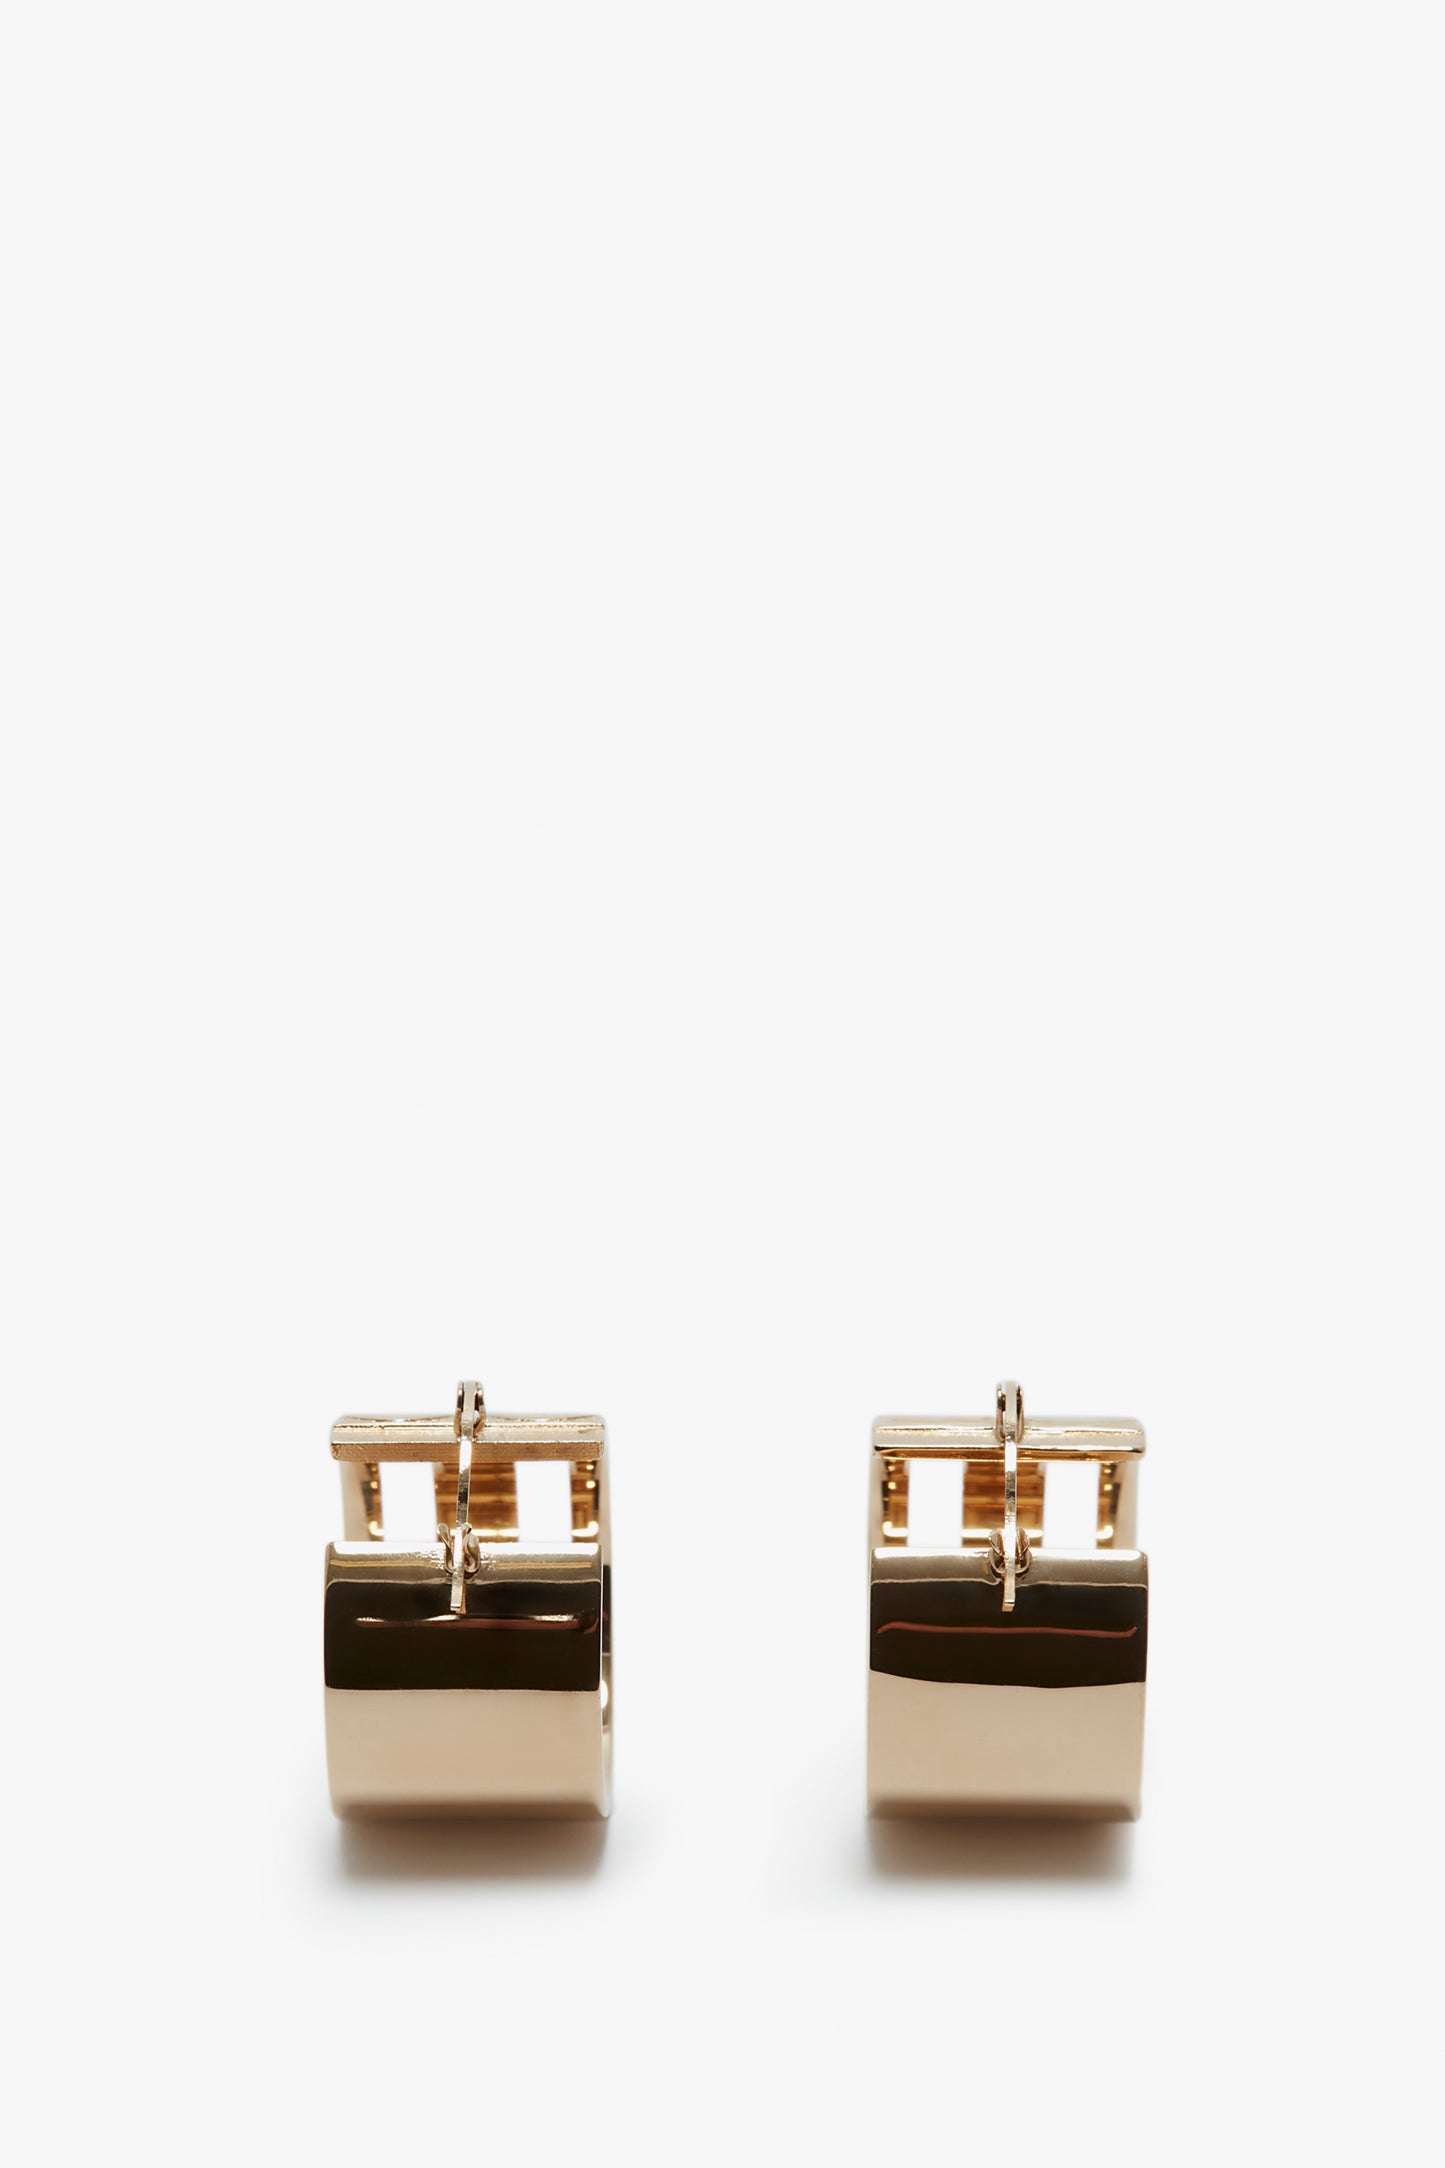 A pair of elegant, Victoria Beckham exclusive frame hoop earrings in gold on a white background.